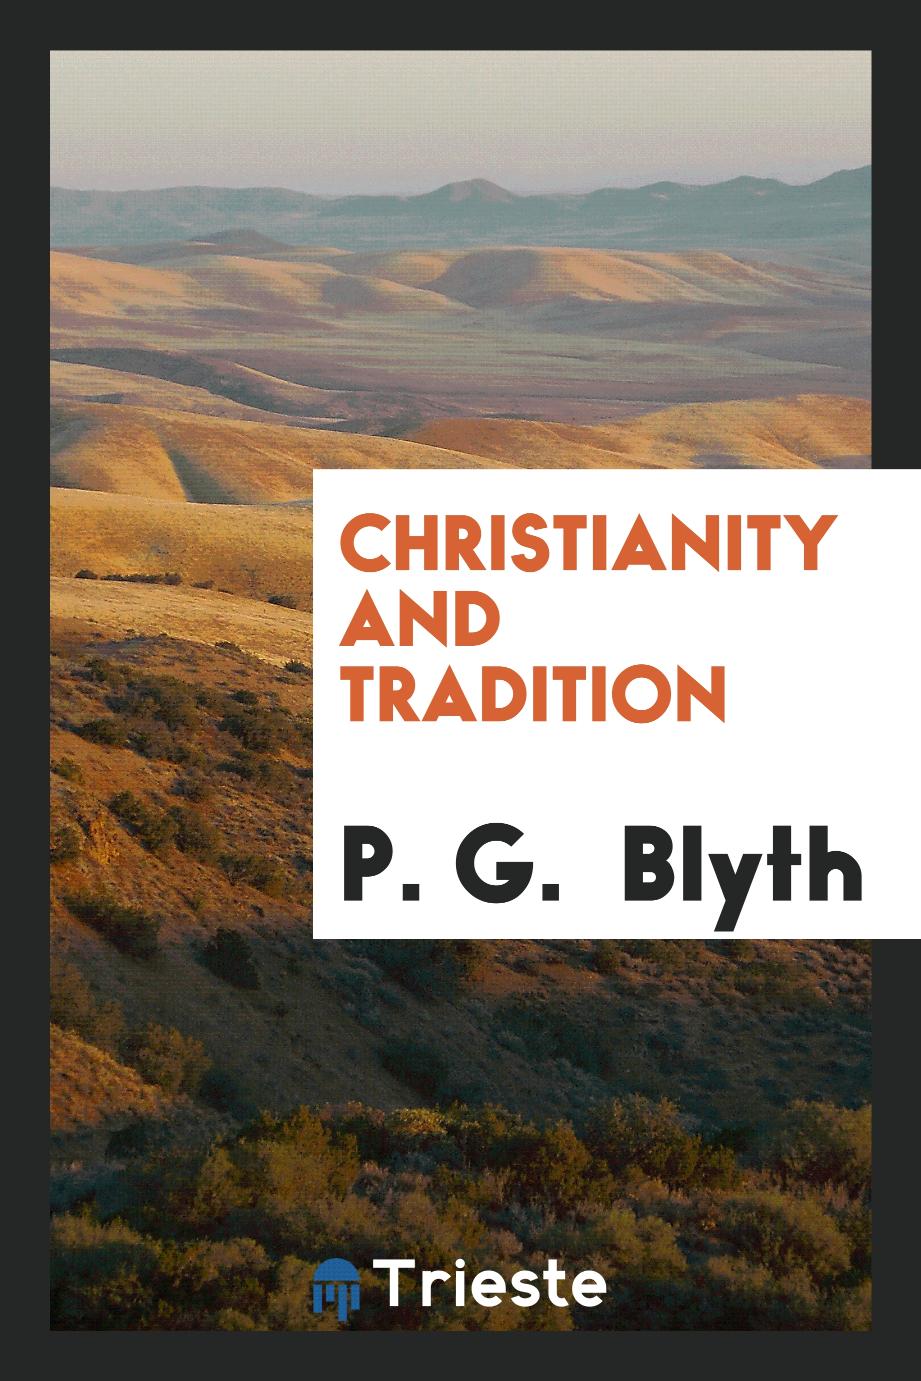 Christianity and Tradition